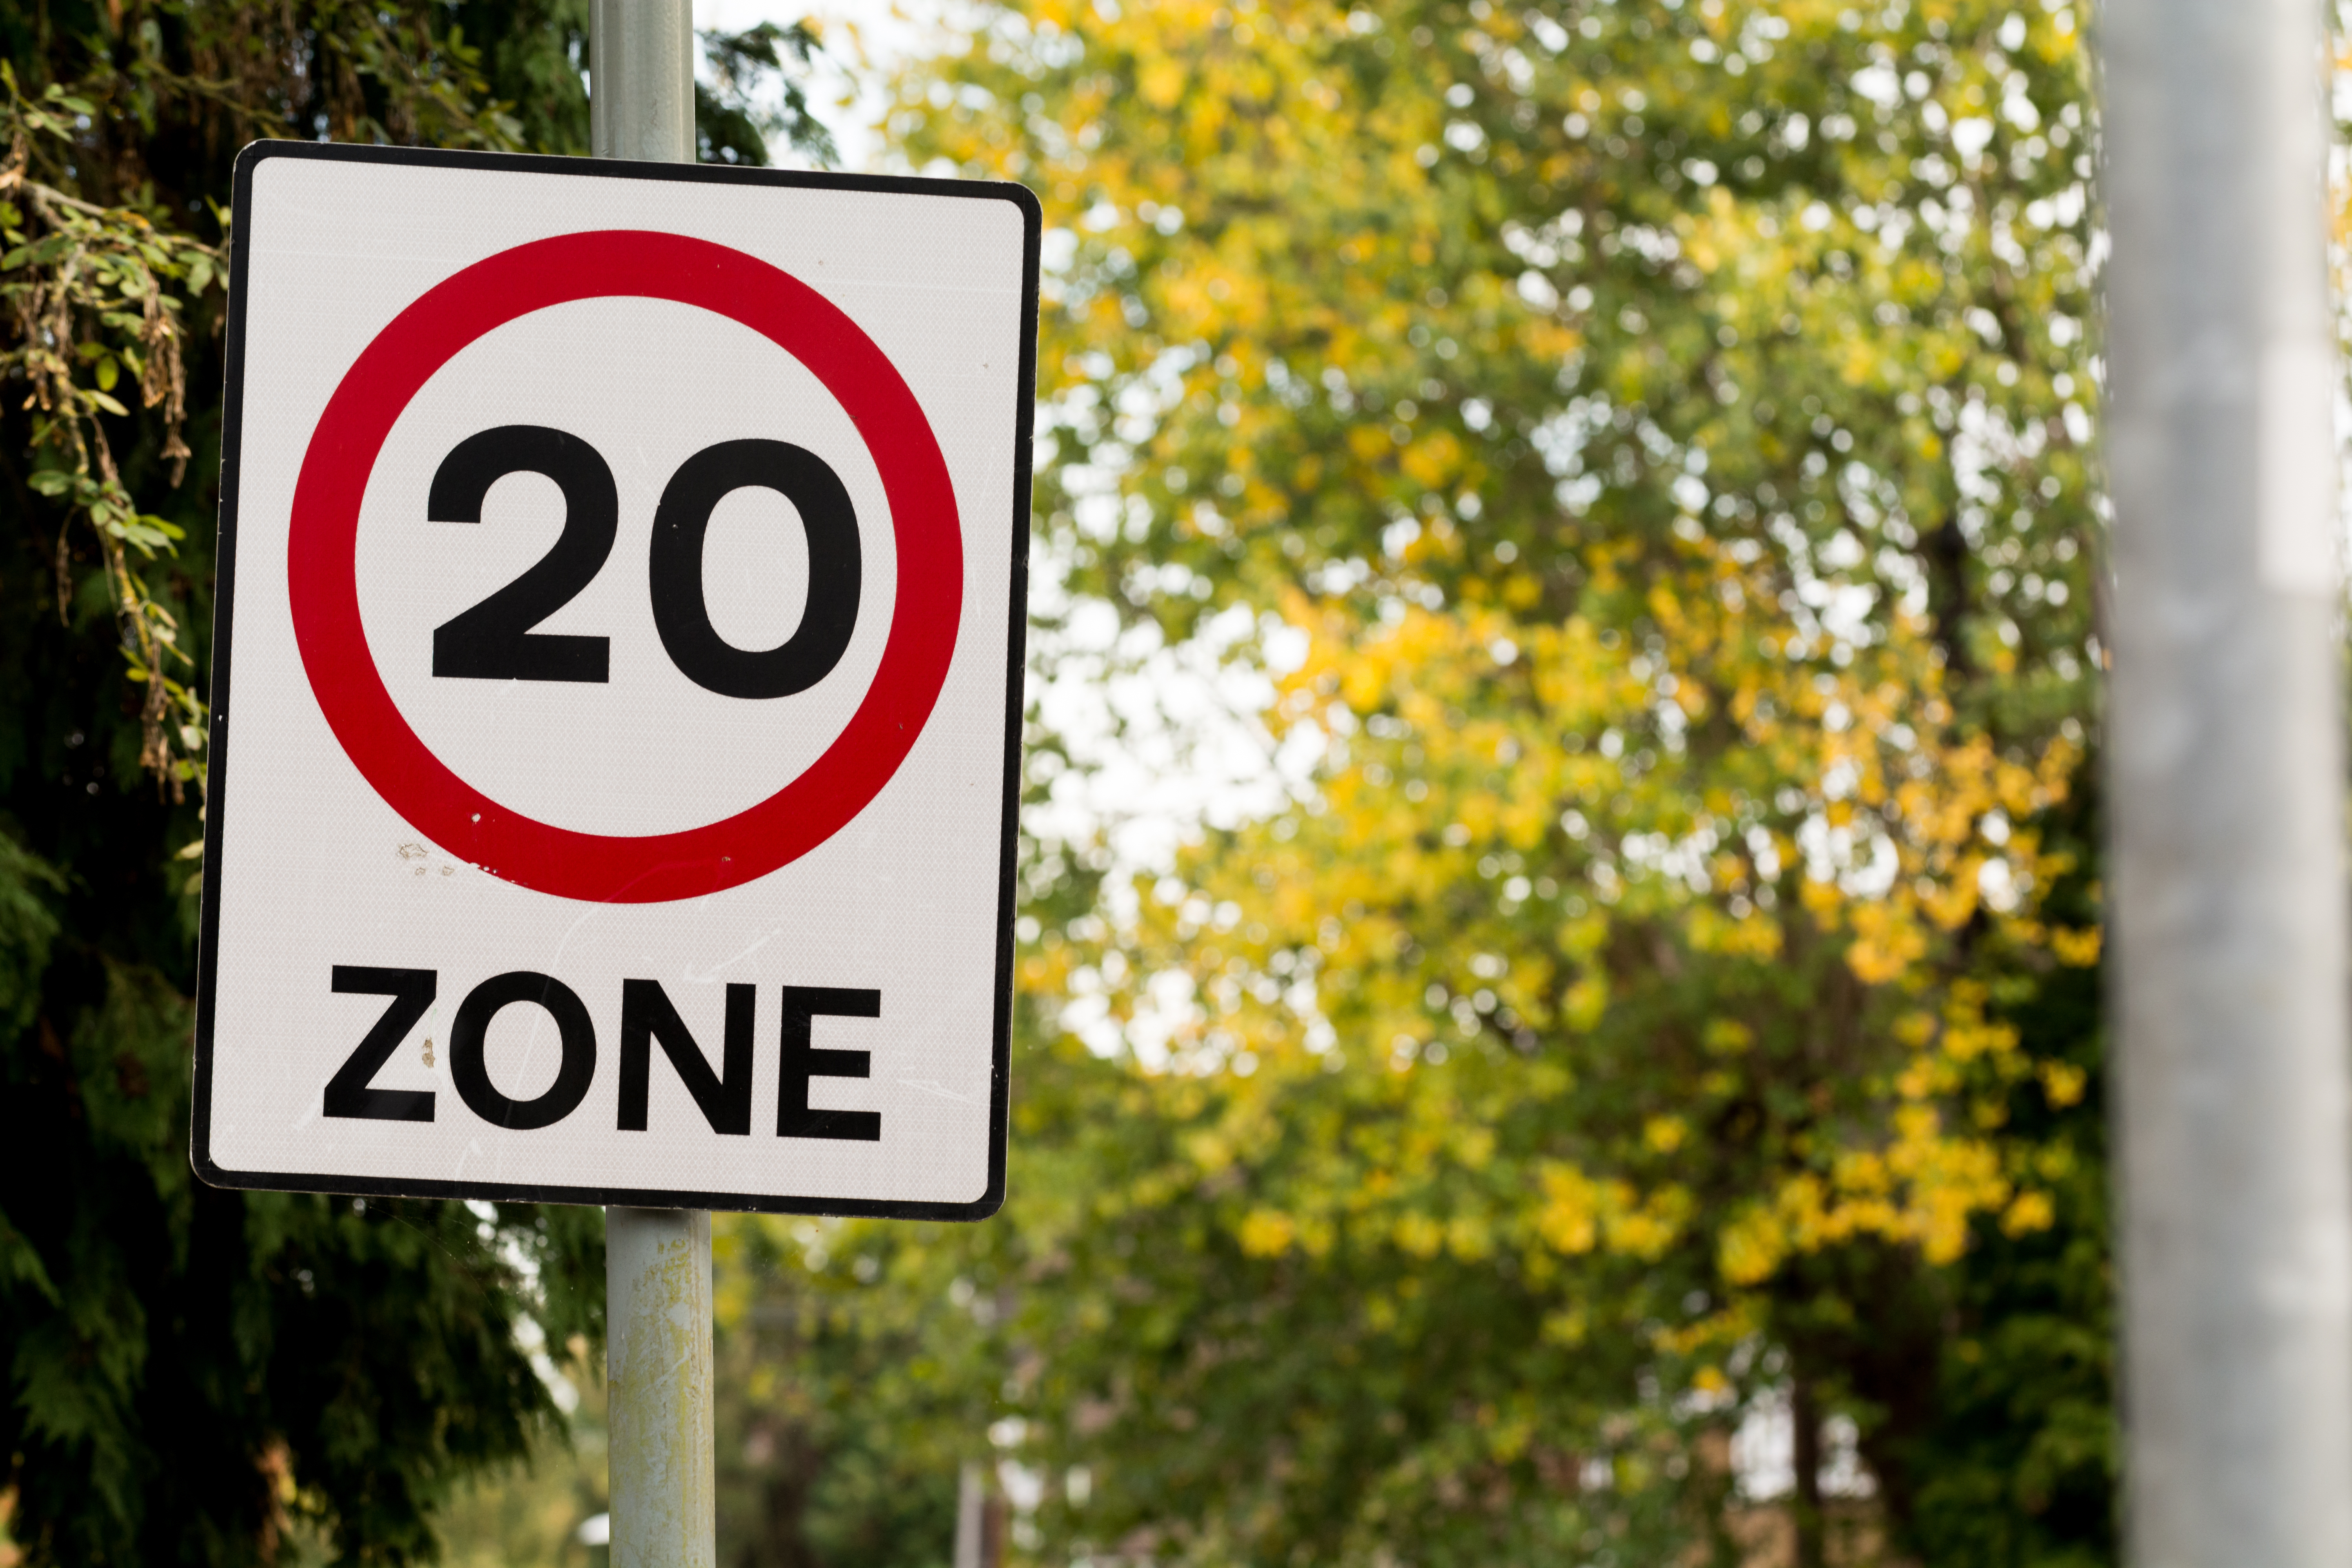 PRESS RELEASE: Sevenoaks Town Council believe it is best placed to progress  the 20-mph consultation within its local community